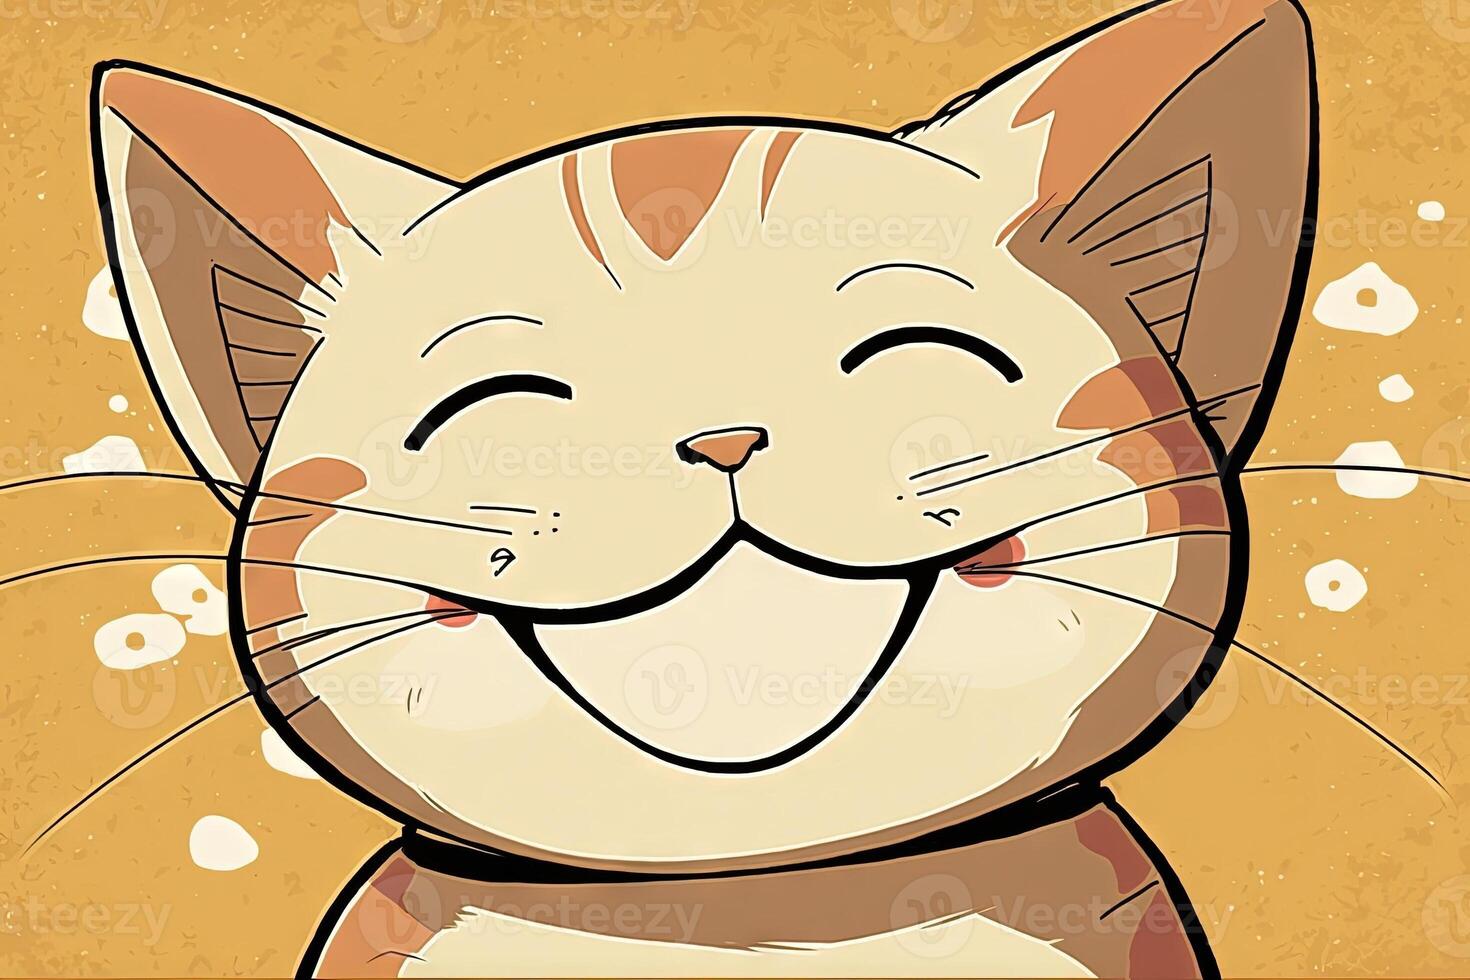 ANime smiling cat with happy expression illustration photo